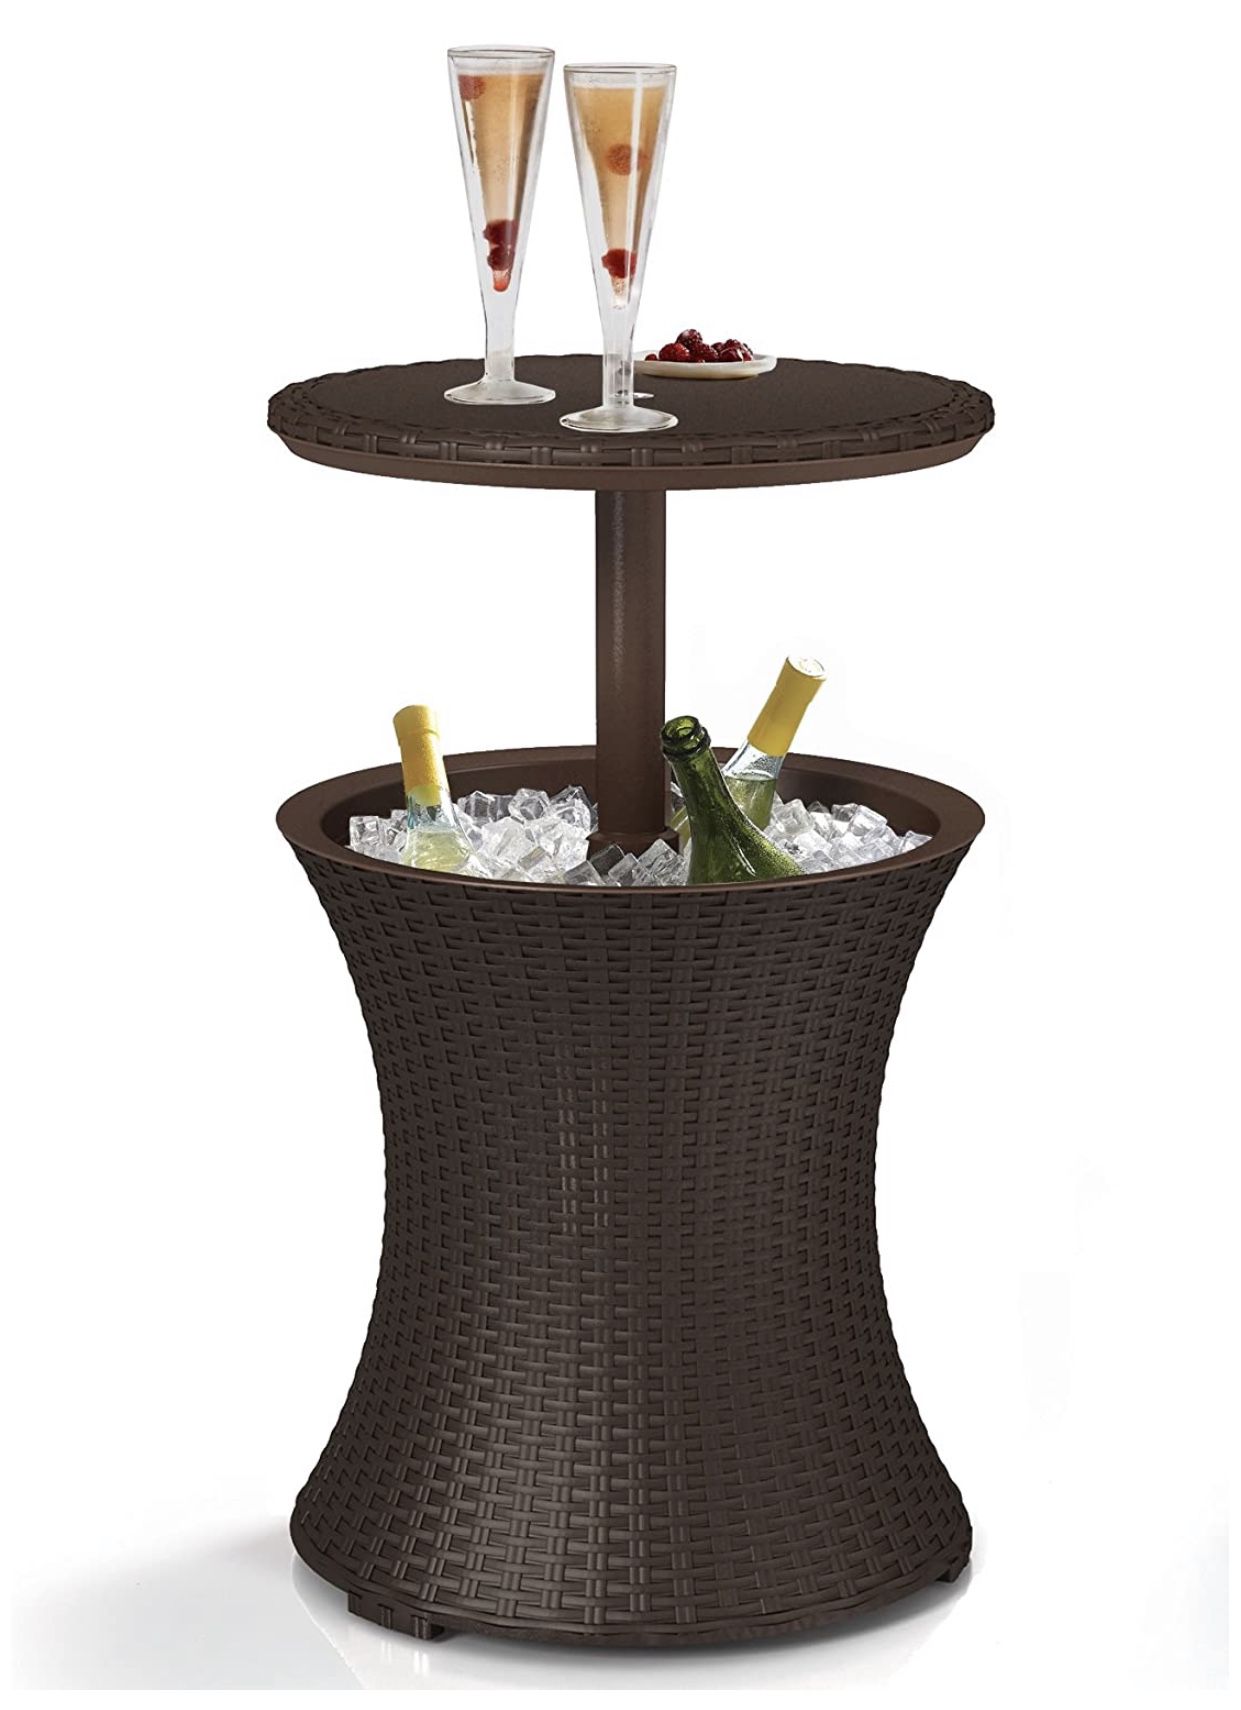 BRAND NEW Cool Bar Outdoor Patio Furniture and Cooler